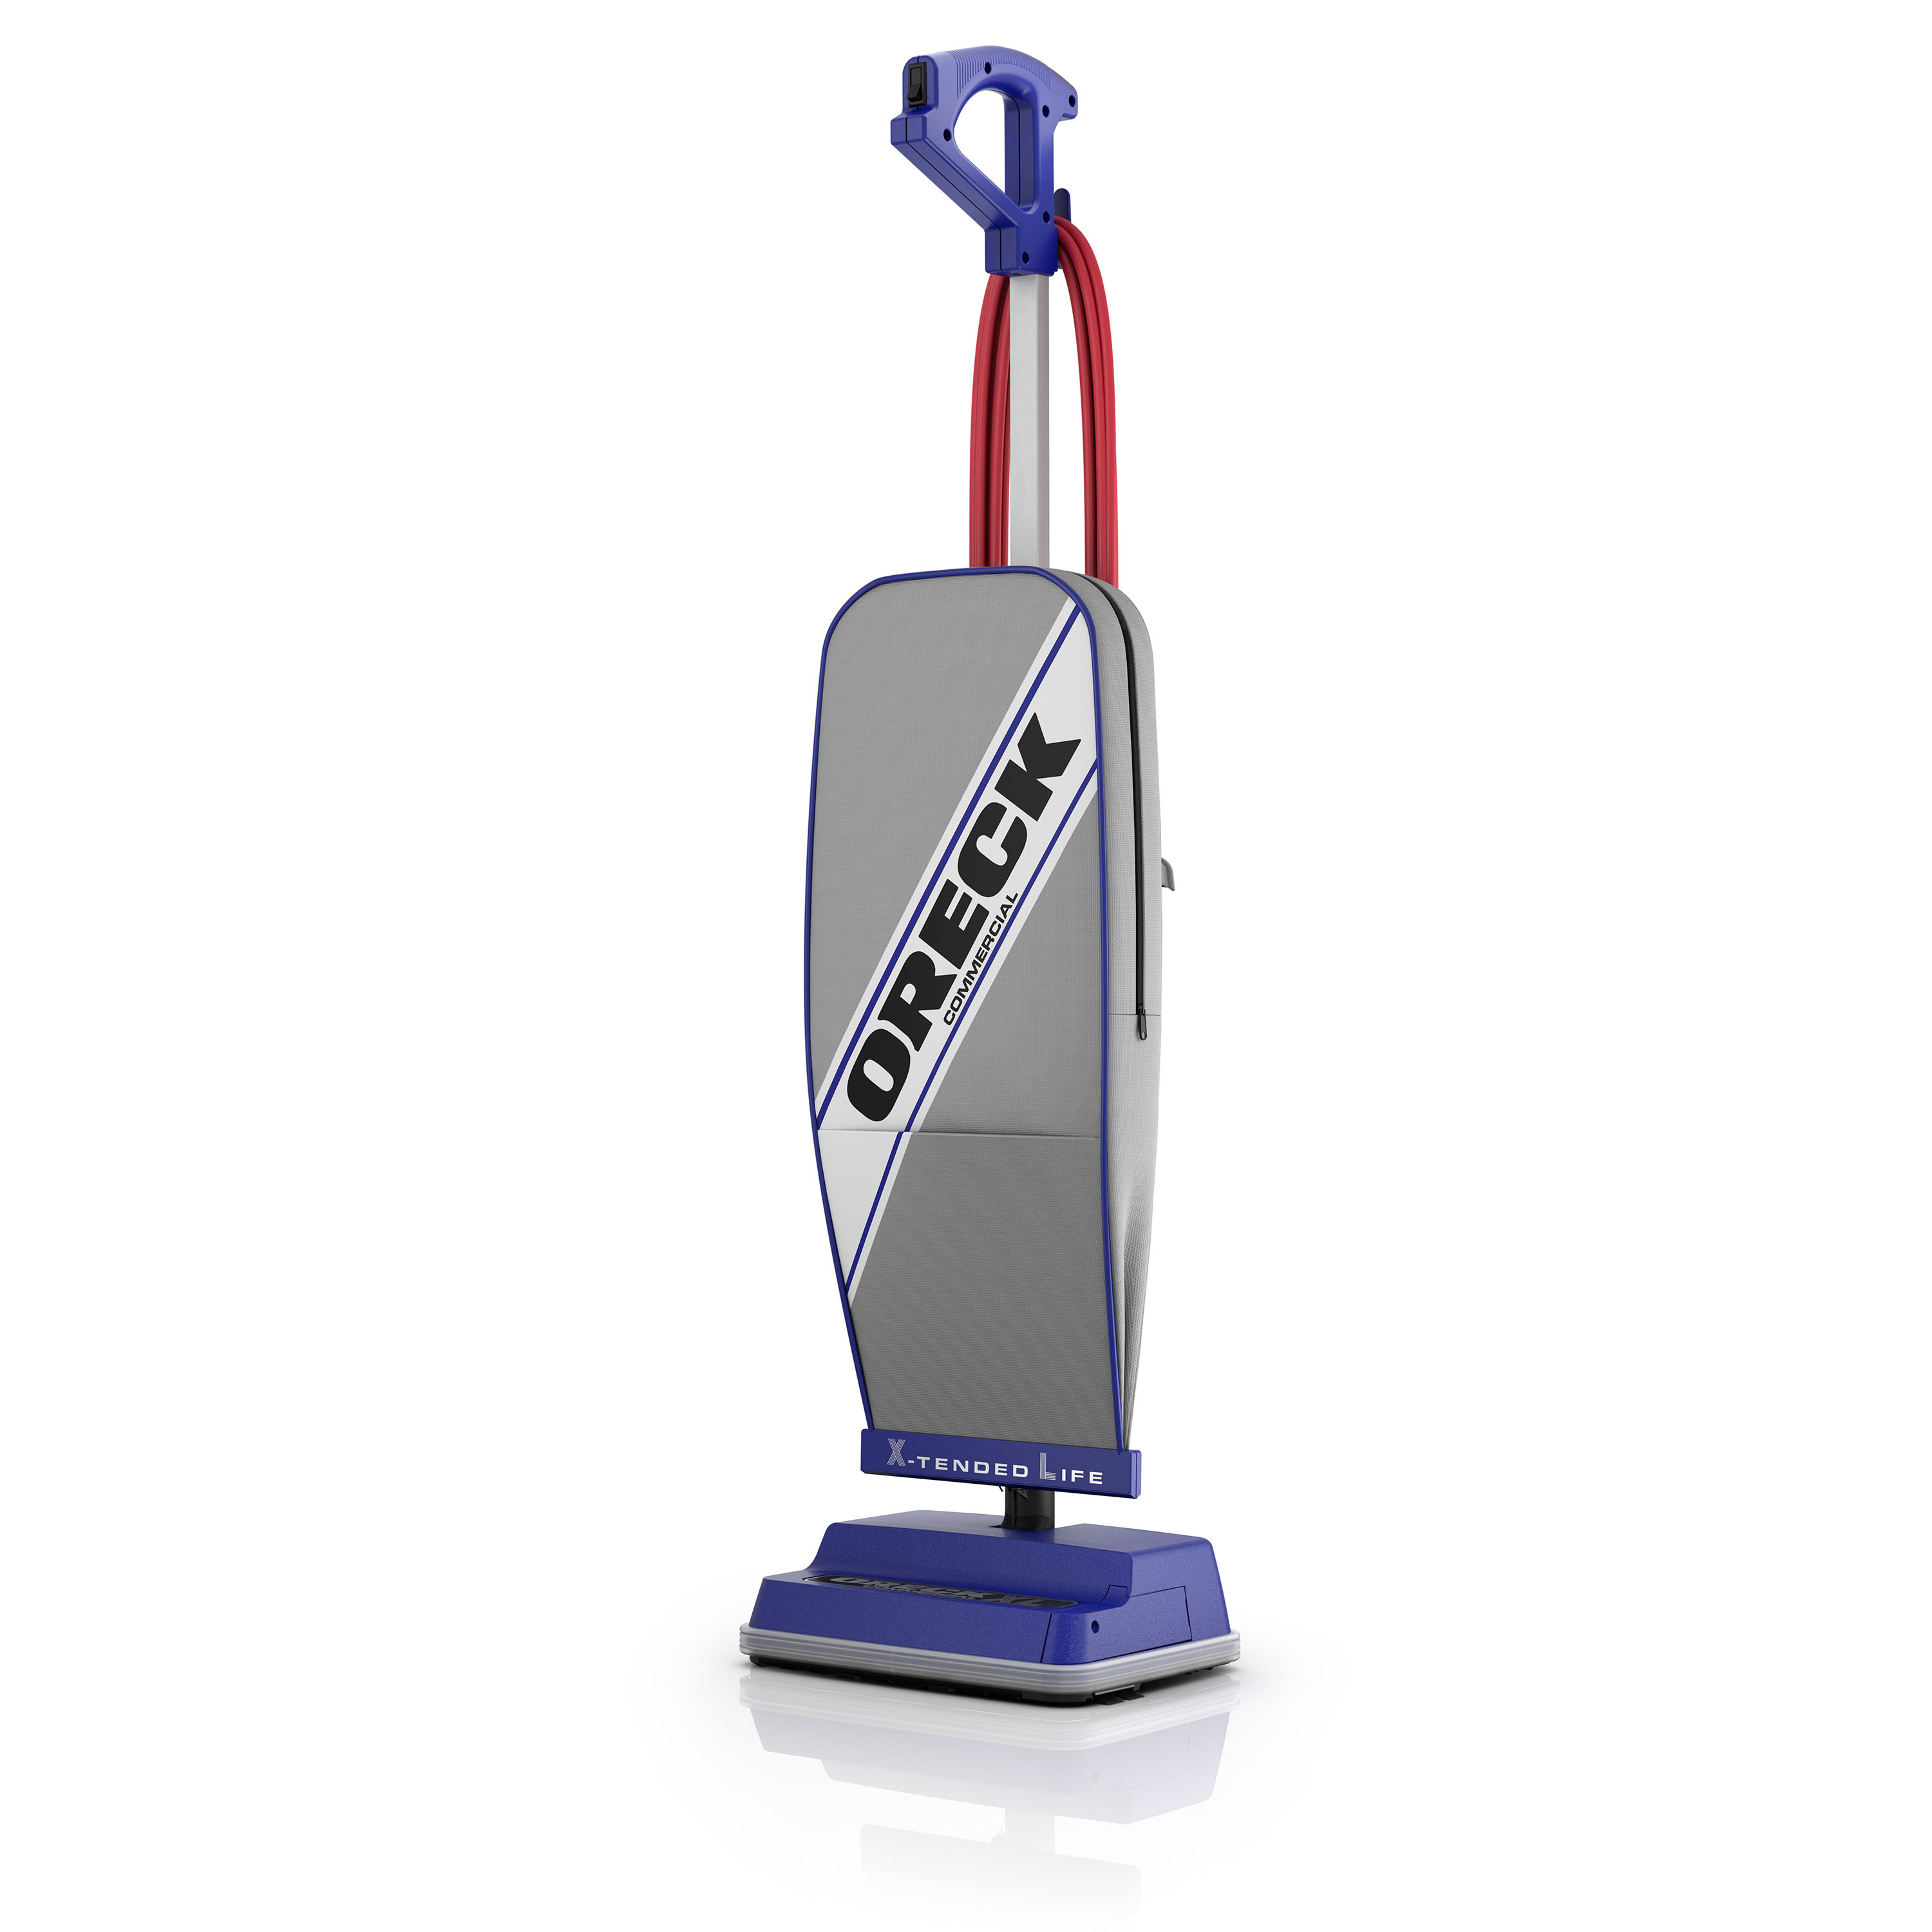 Oreck Commercial Upright Vacuum Cleaner, Bagged Professional Pro Grade, For Carpet and Hard Floor, XL2100RHS - image 3 of 10